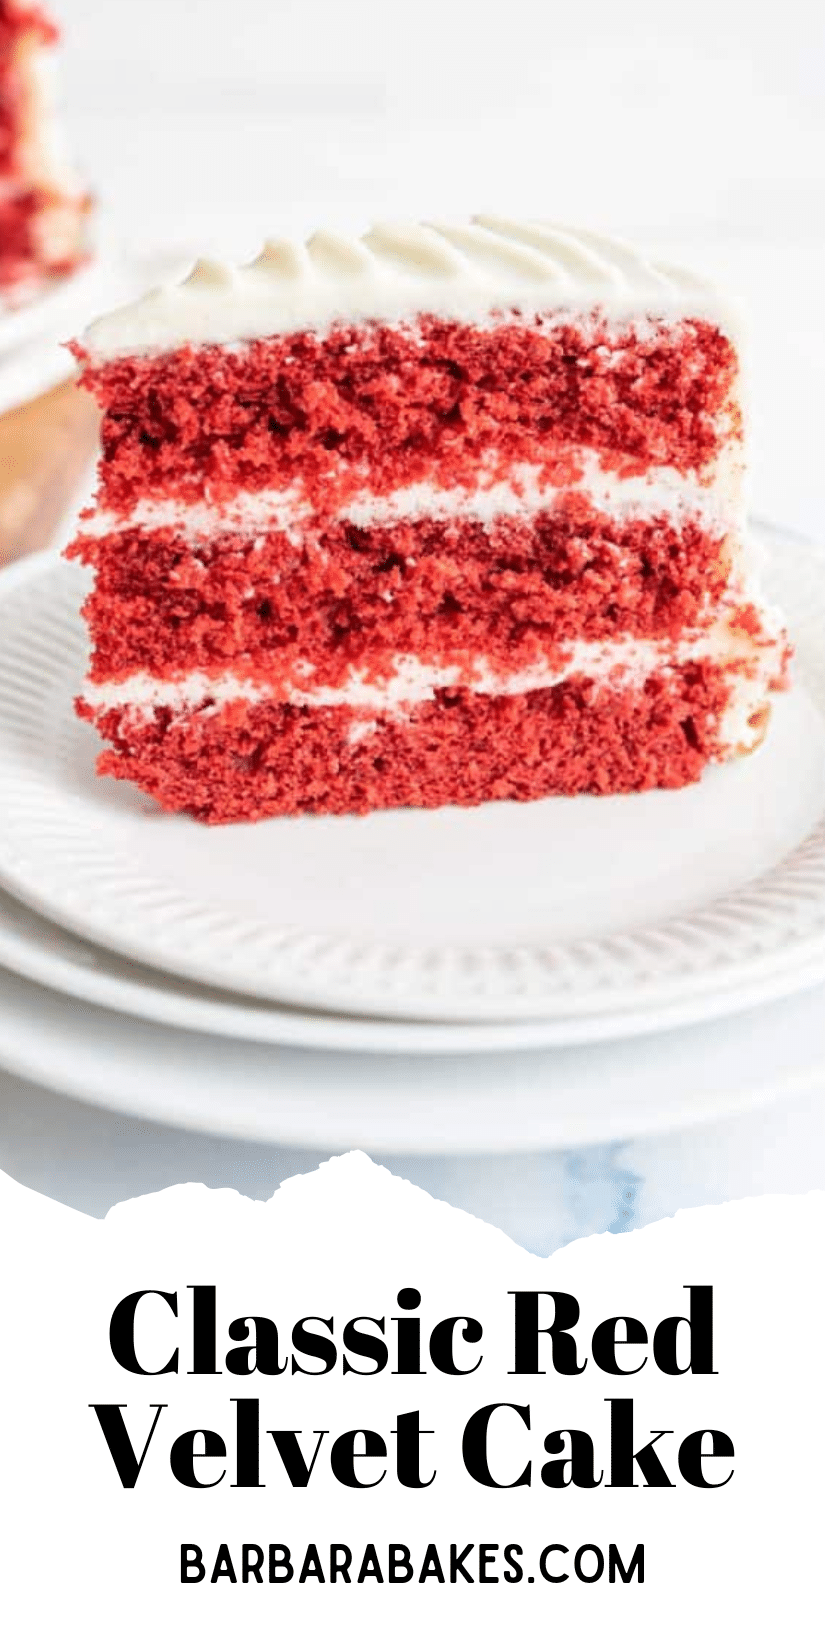 The classic Red Velvet Cake has always been a crowd pleaser for it’s beautiful color, taste and flavor. This cake is moist and delicious-perfect for any occasion. via @barbarabakes